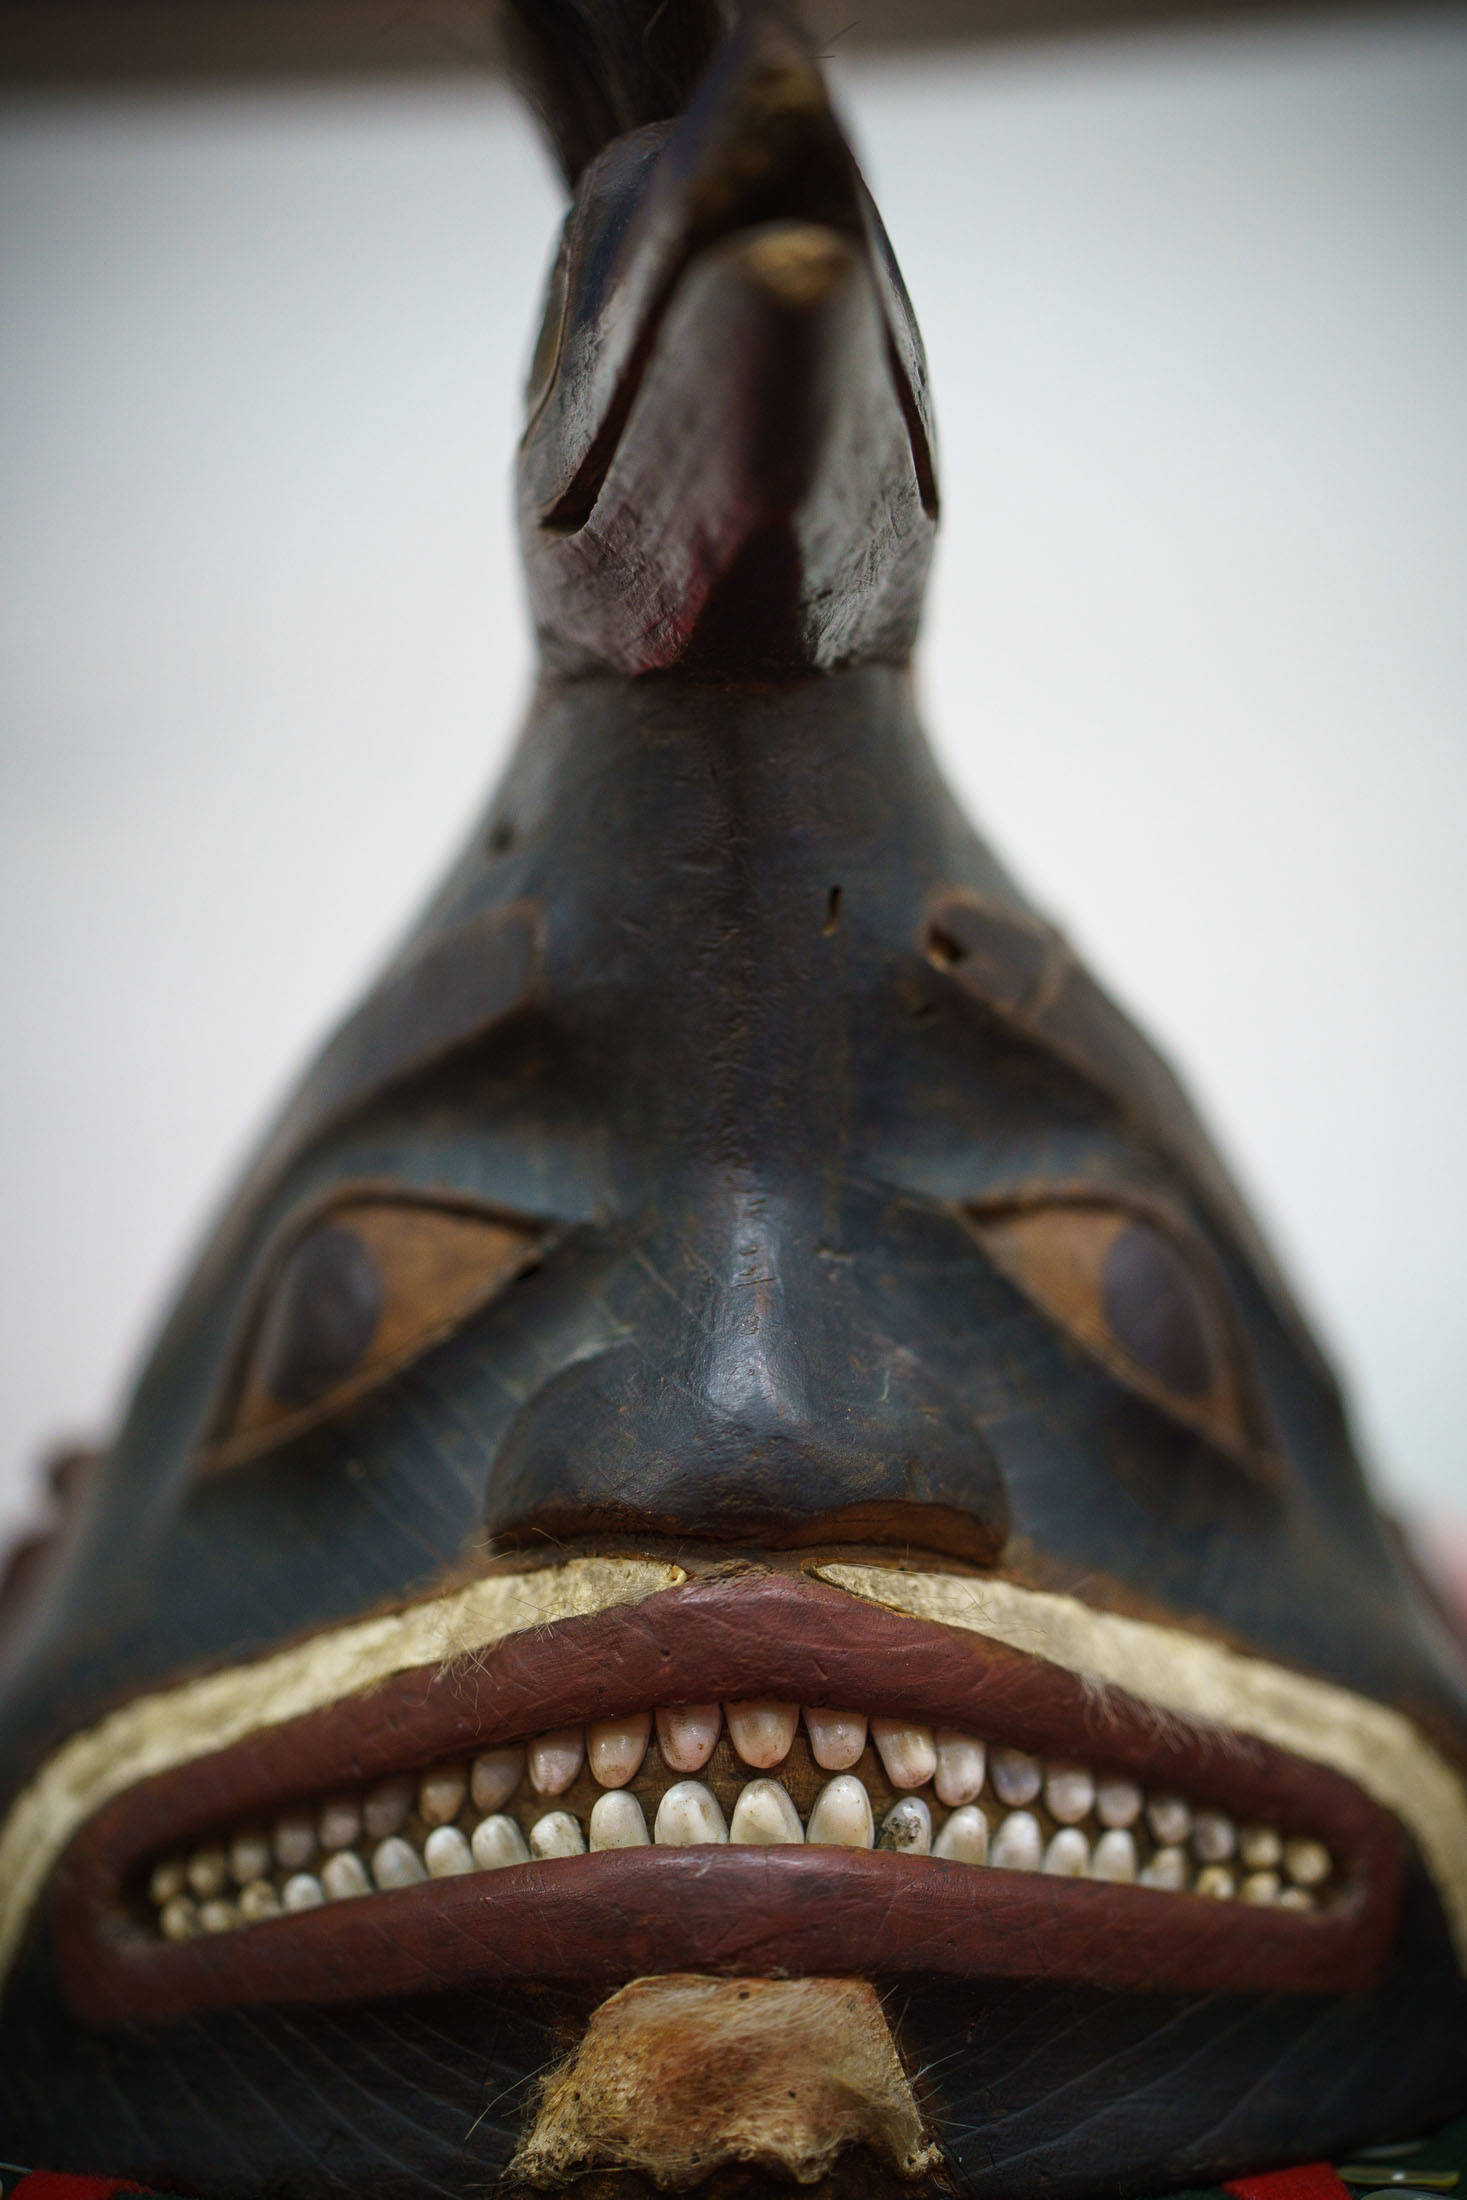 A close up of one of the Tlingit war helmets recently returned to the Kiks.adi from an east coast museum. Photo by Bethany Goodrich